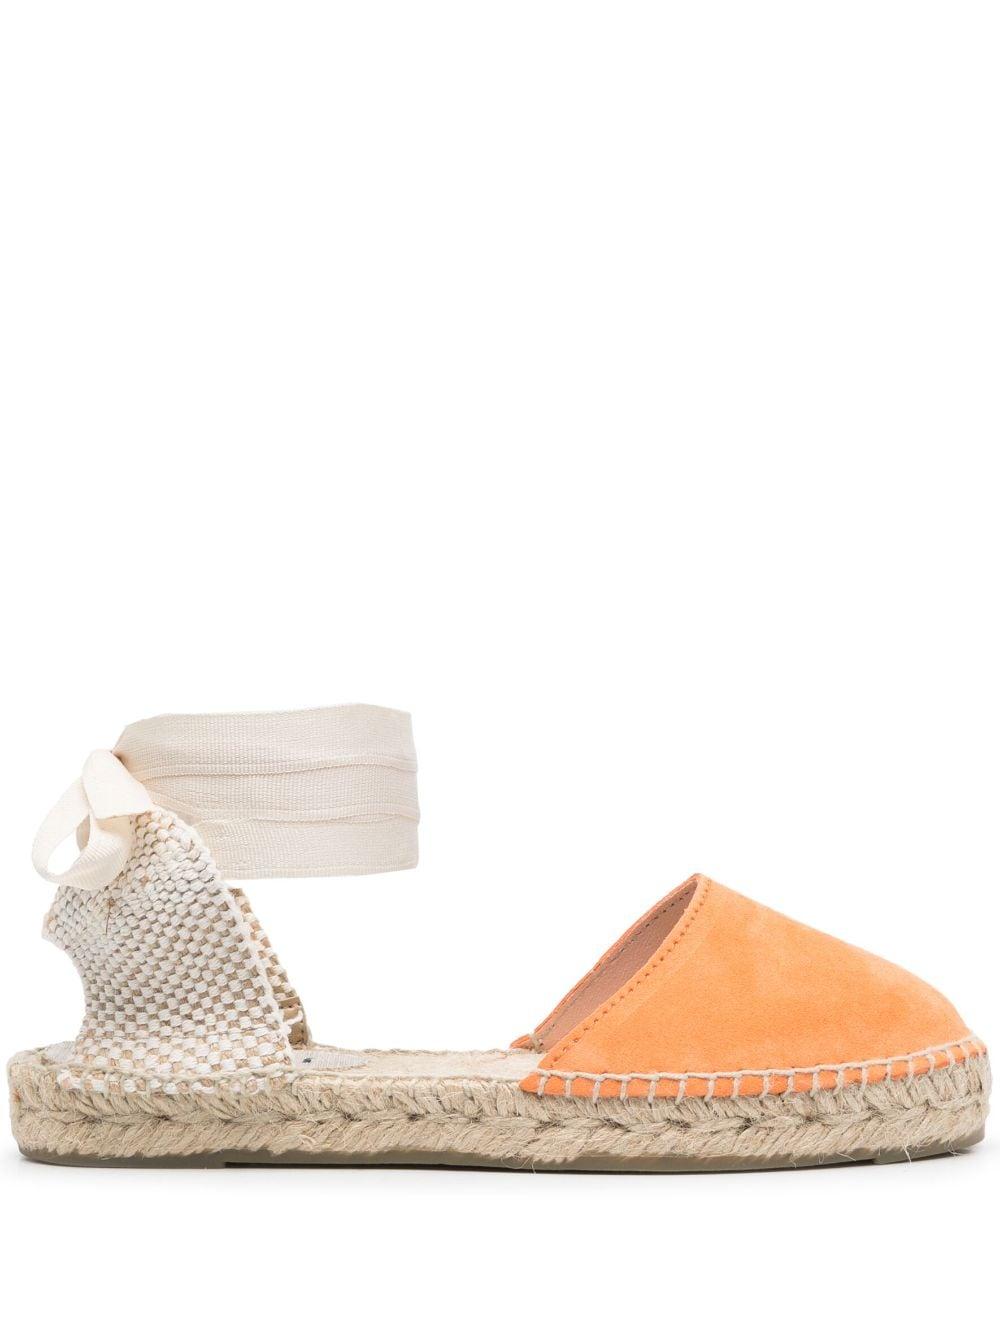 Manebí Hamptons Lace-up Flat Espadrilles in Natural | Lyst